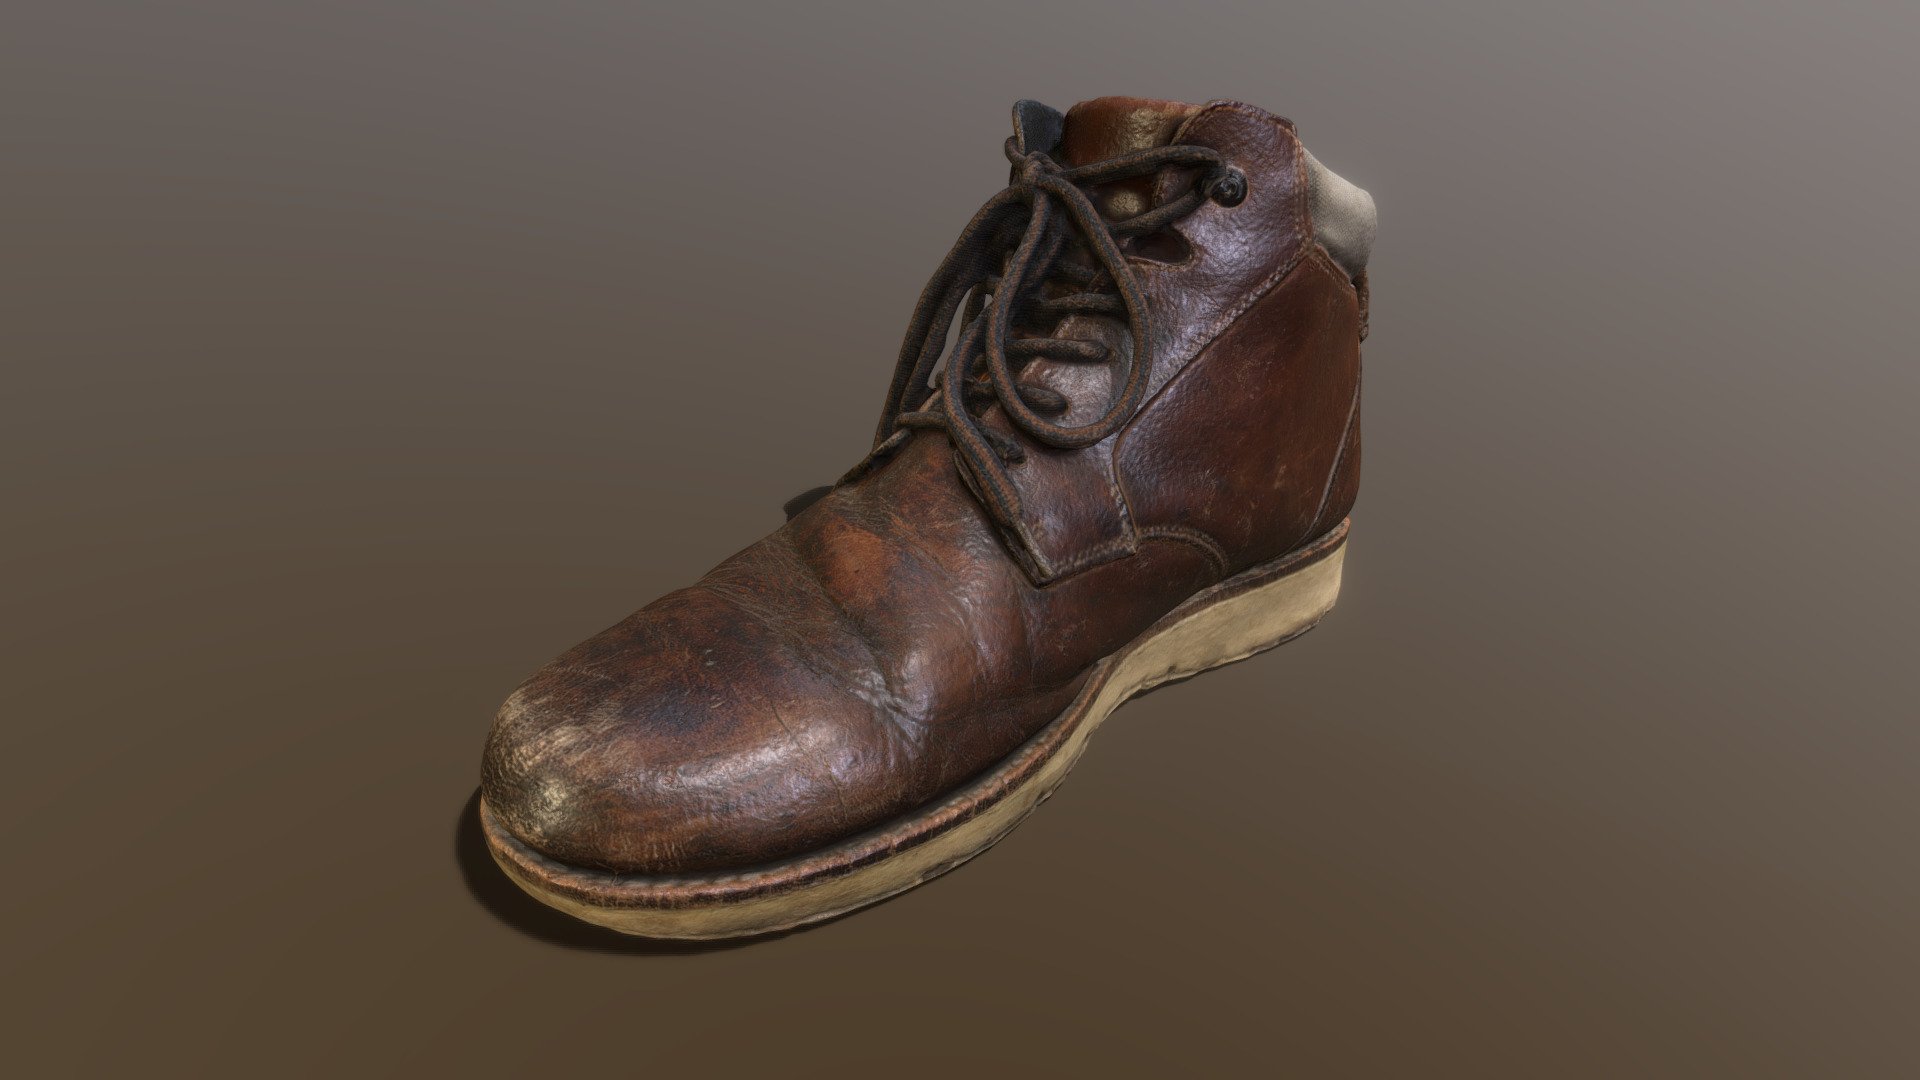 2nd Cross polarization photogrammetry test, textures made with substance painter 3d model